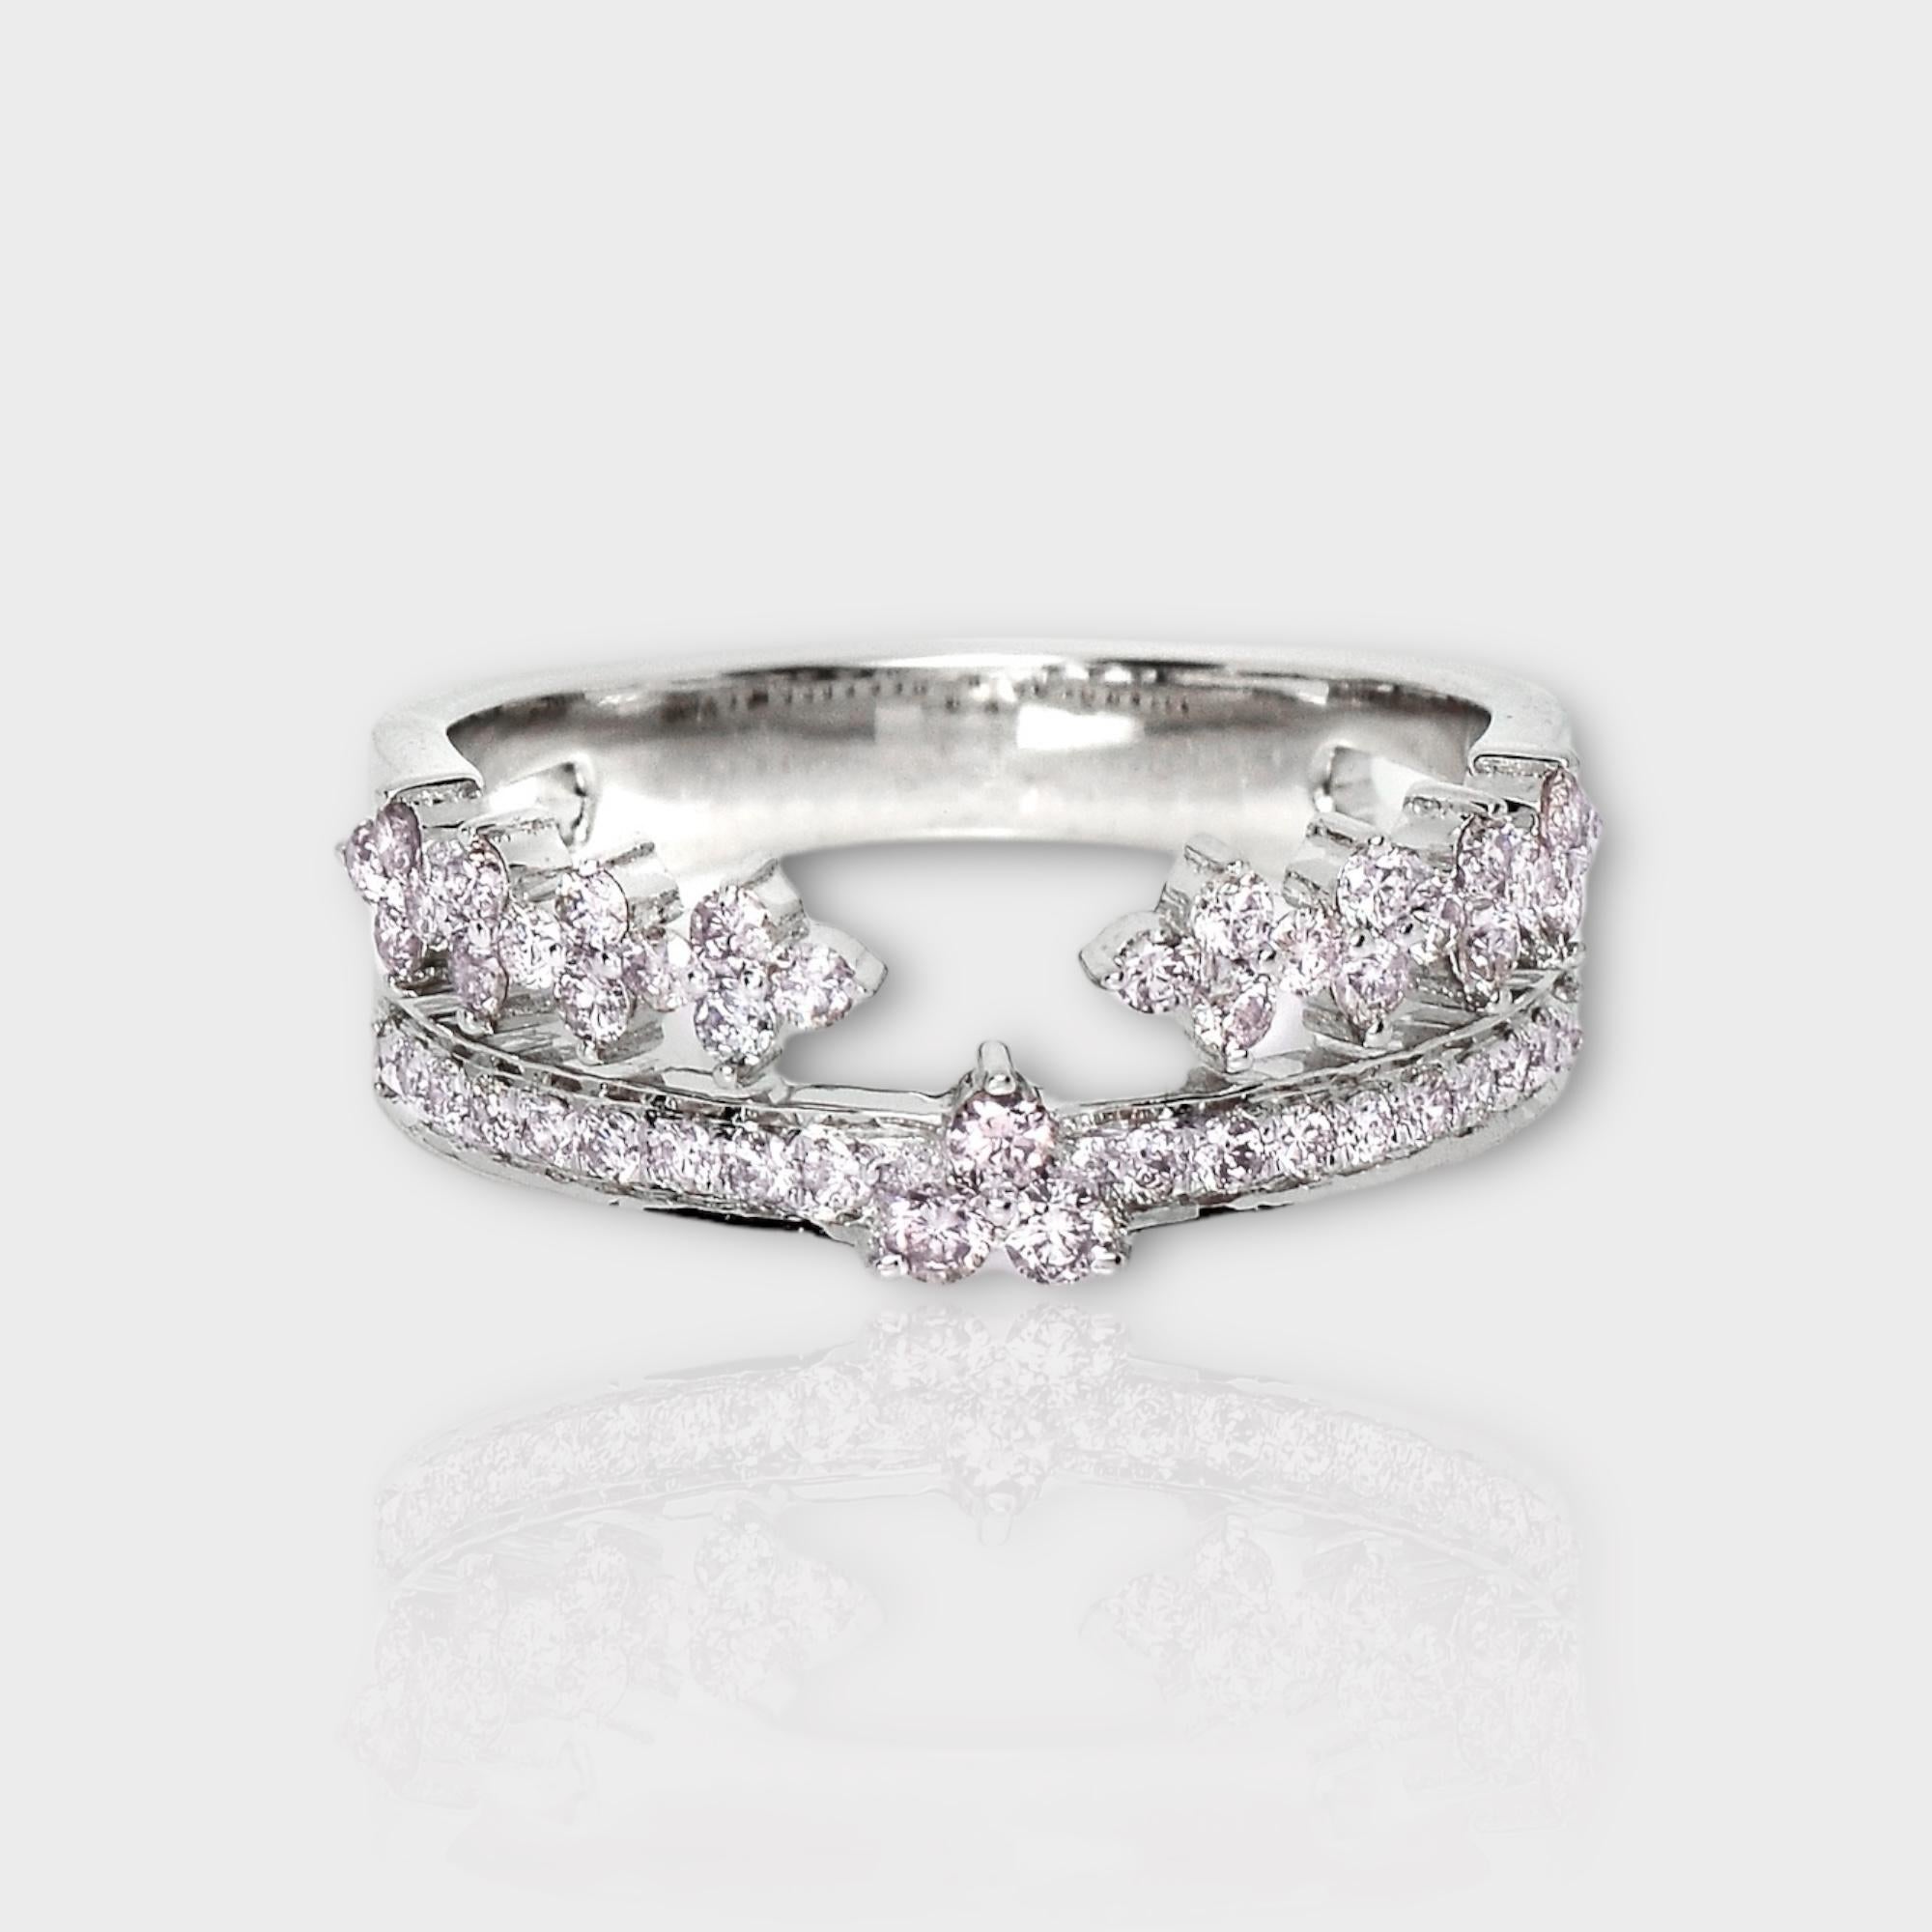 *IGI 14K 0.52 ct Natural Pink Diamonds Vintage Crown  Design Engagement Ring*

This band features a stunning design with a vintage crown crafted from 14K white gold. It is set with natural pink diamonds weighing 0.52 carats.

This ring features